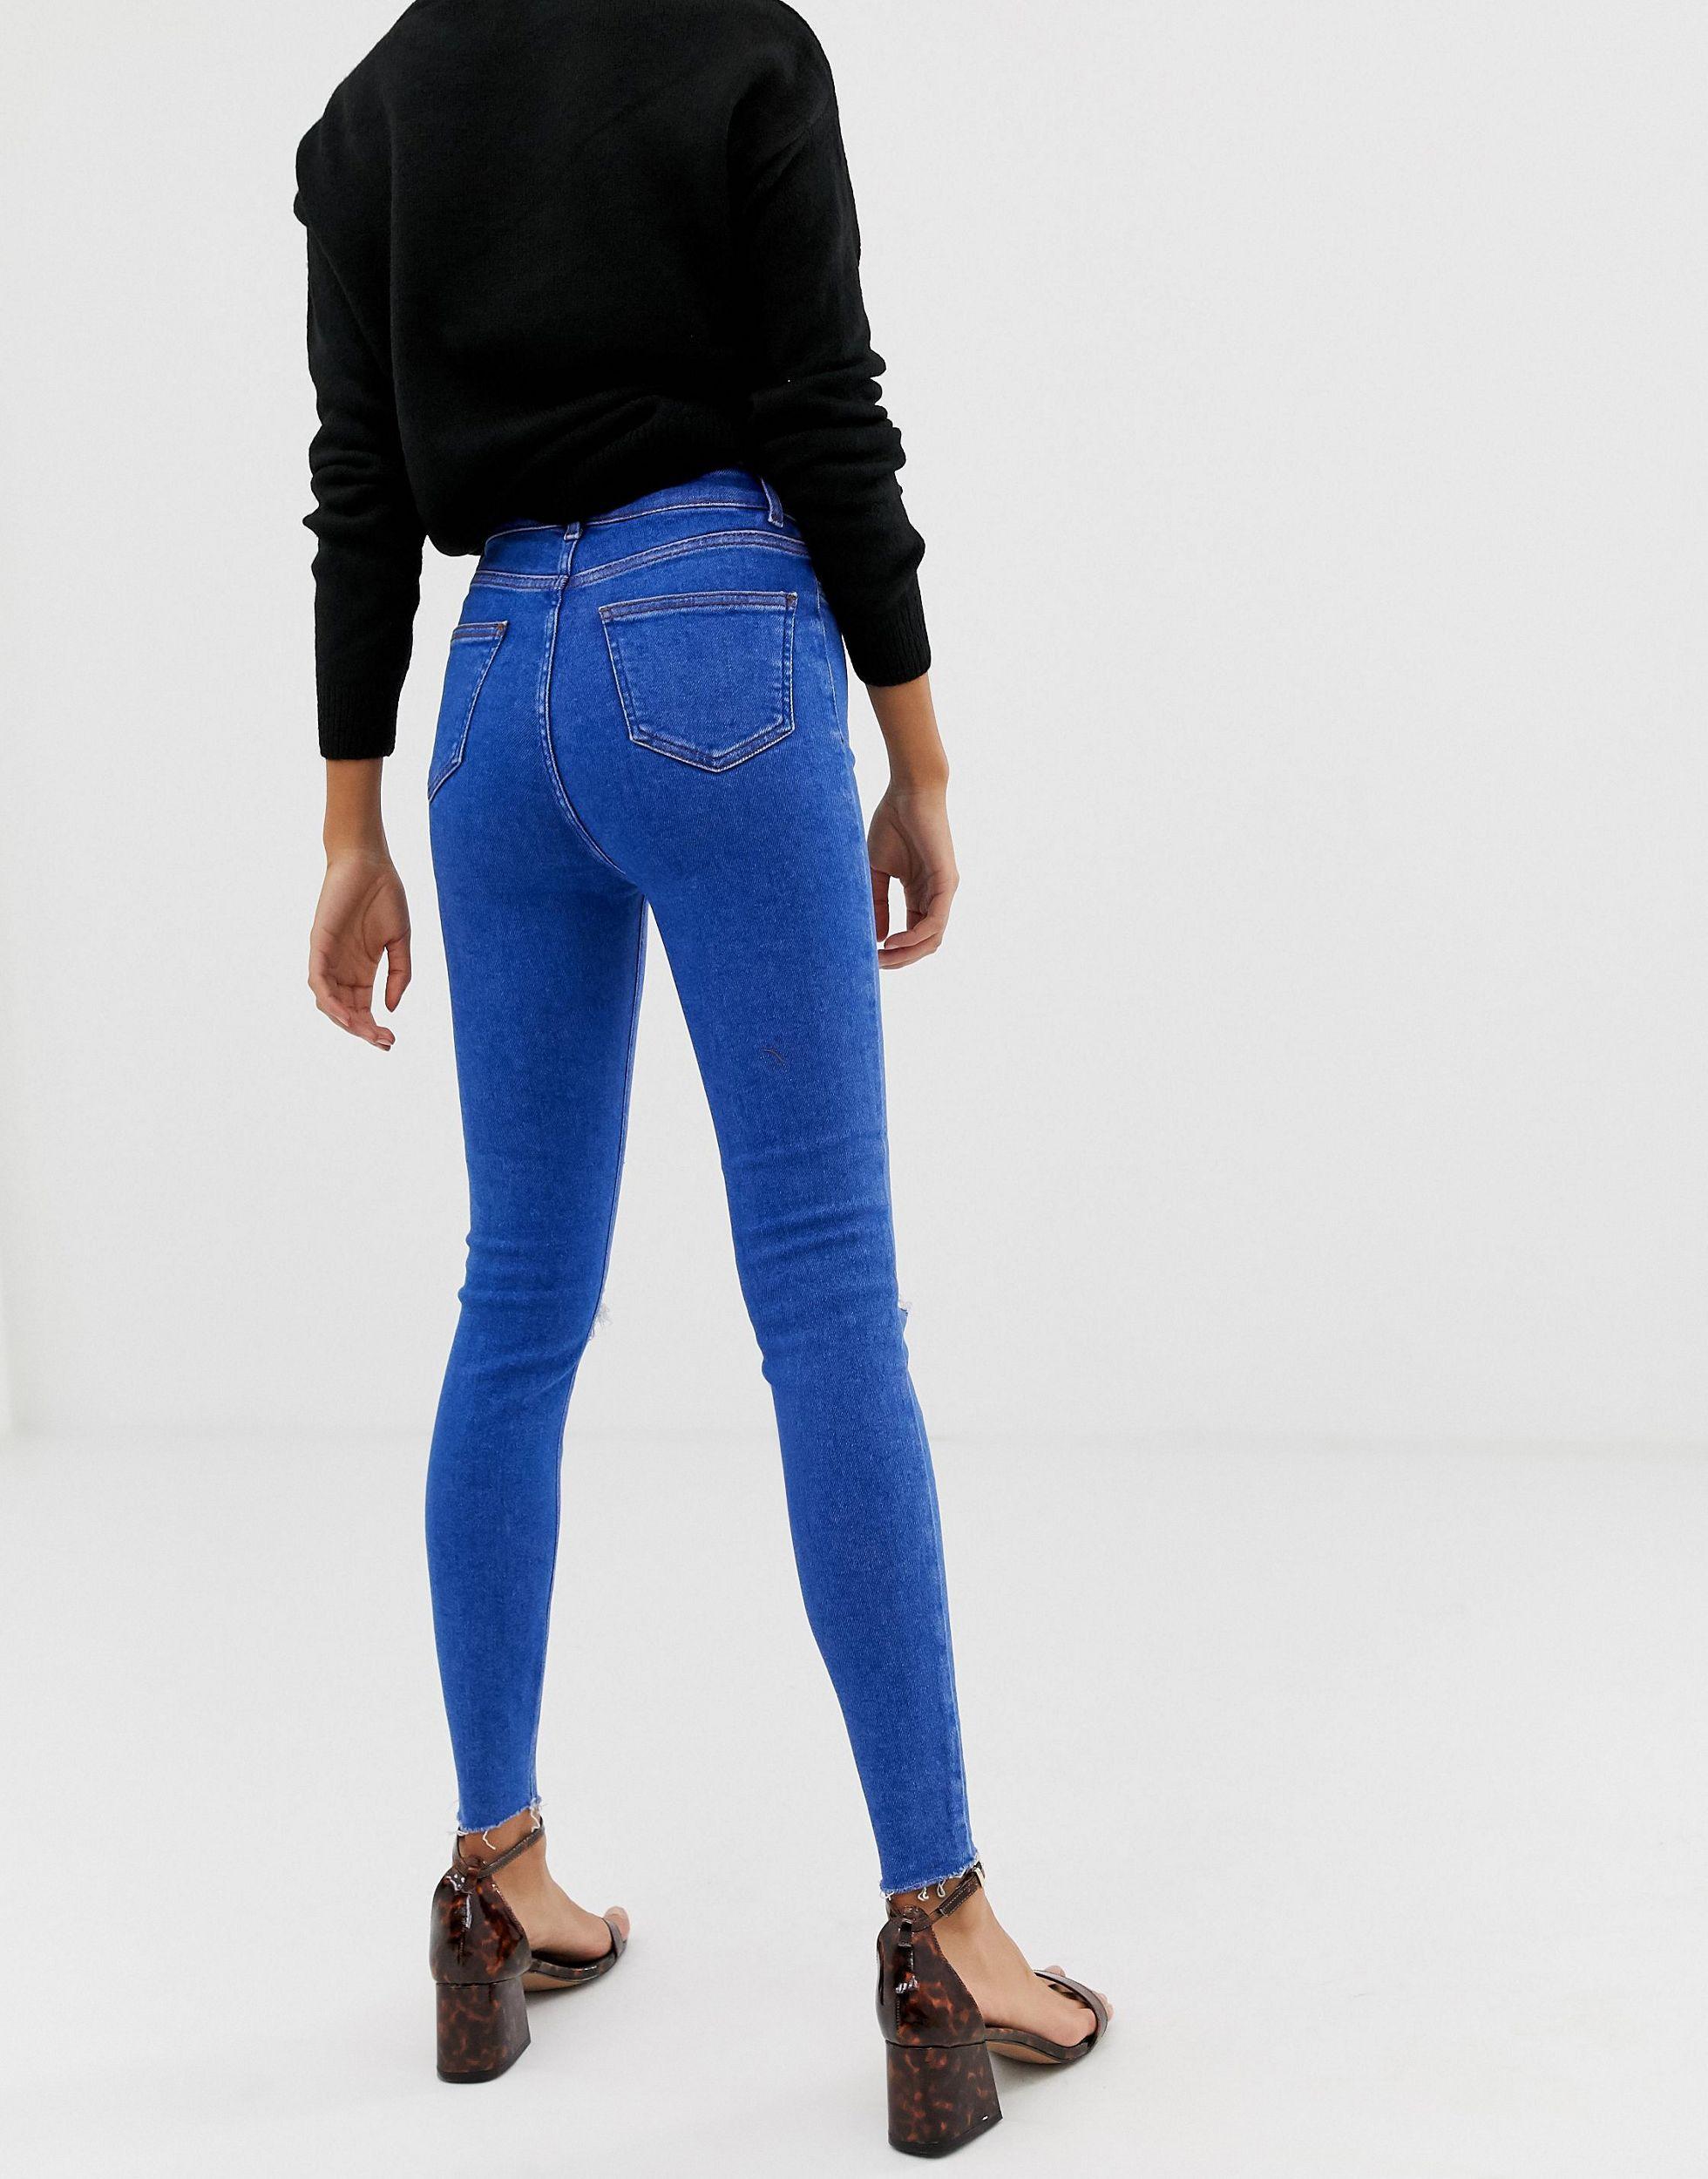 New Look Hallie Disco High Rise Ripped Jeans in Blue | Lyst UK